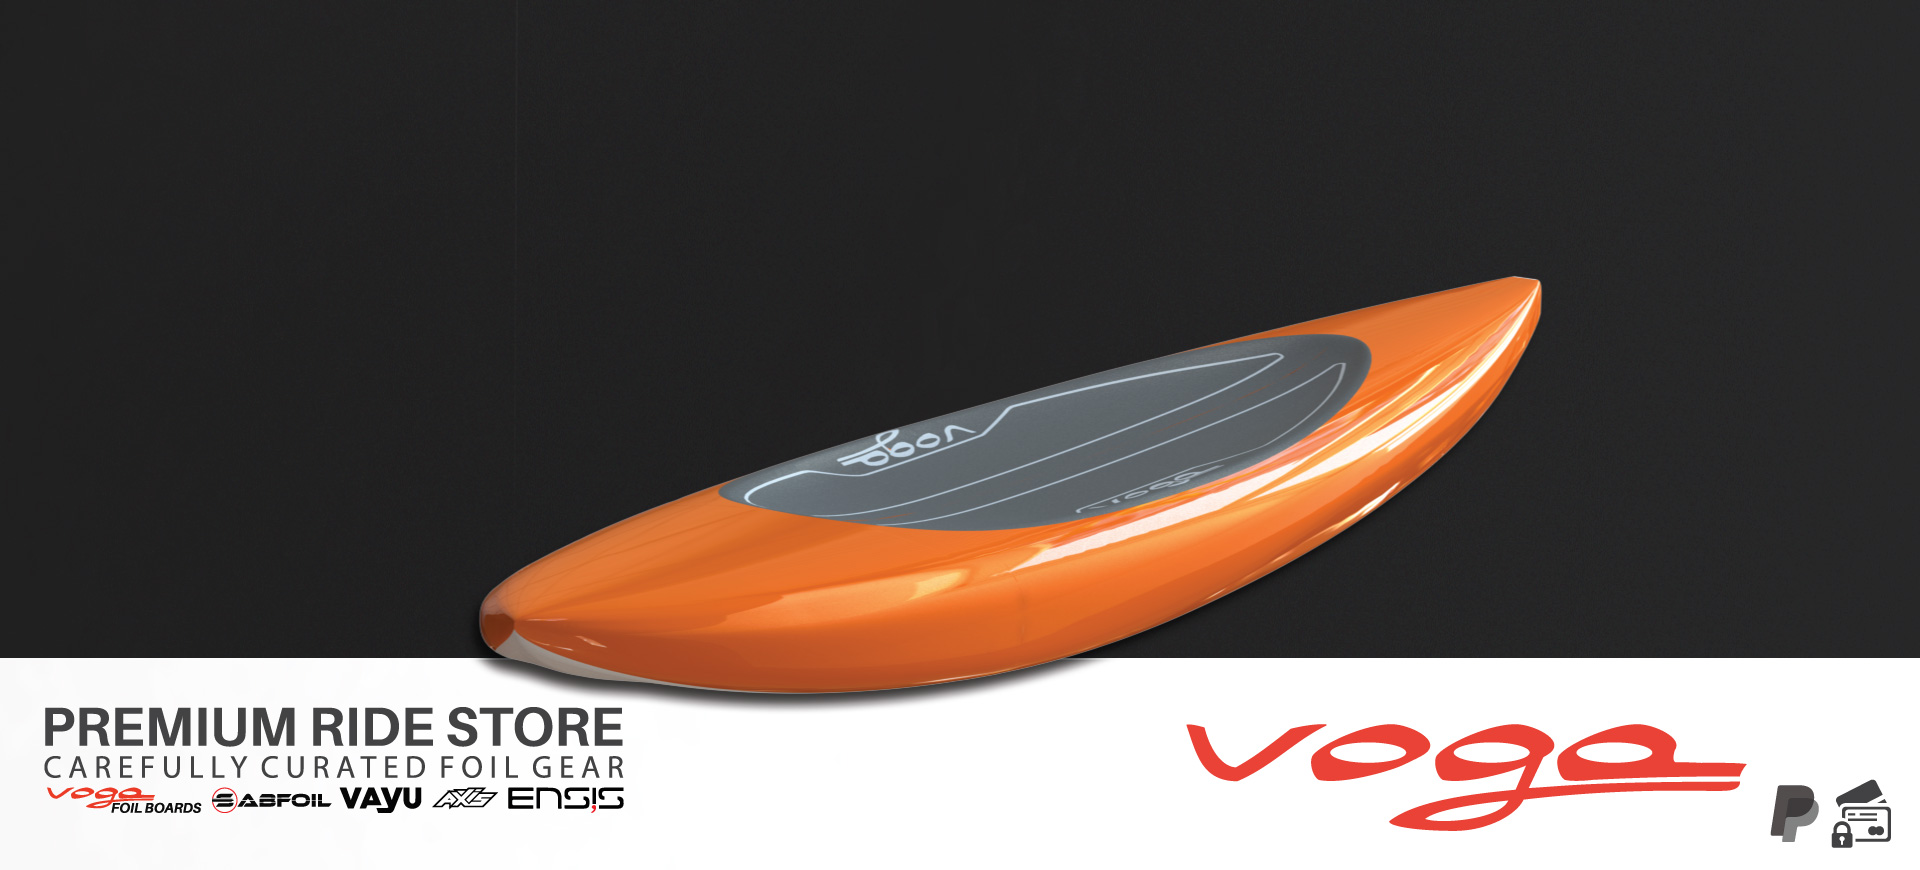 Voga Marine downwind foil board offshore downwind Pure SUP